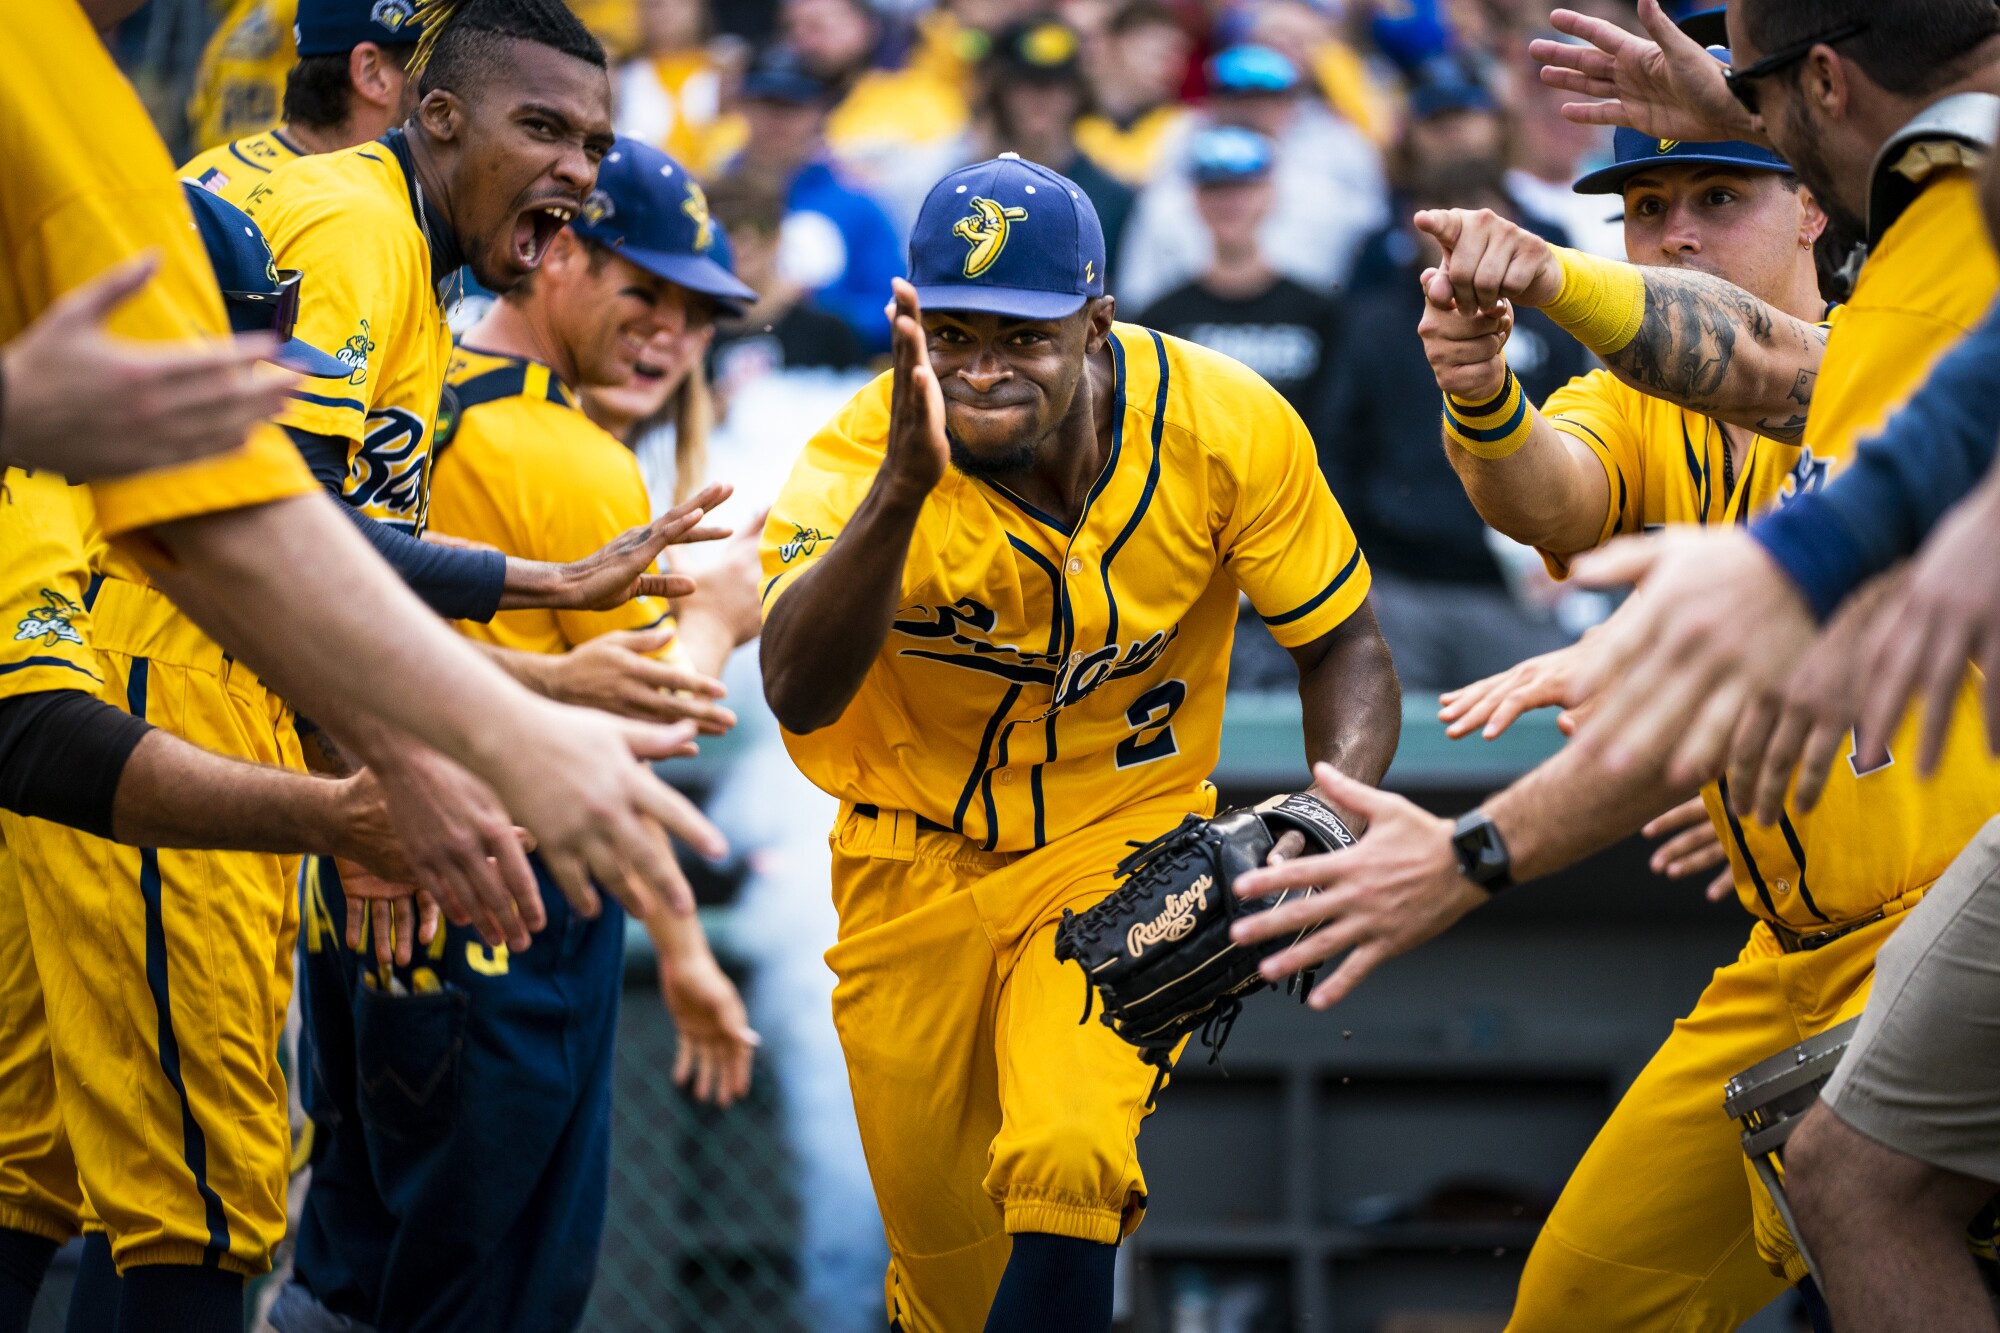 Savannah Bananas outfielder Malachi Mitchell [2) and other members of the starting lineup take to the field.